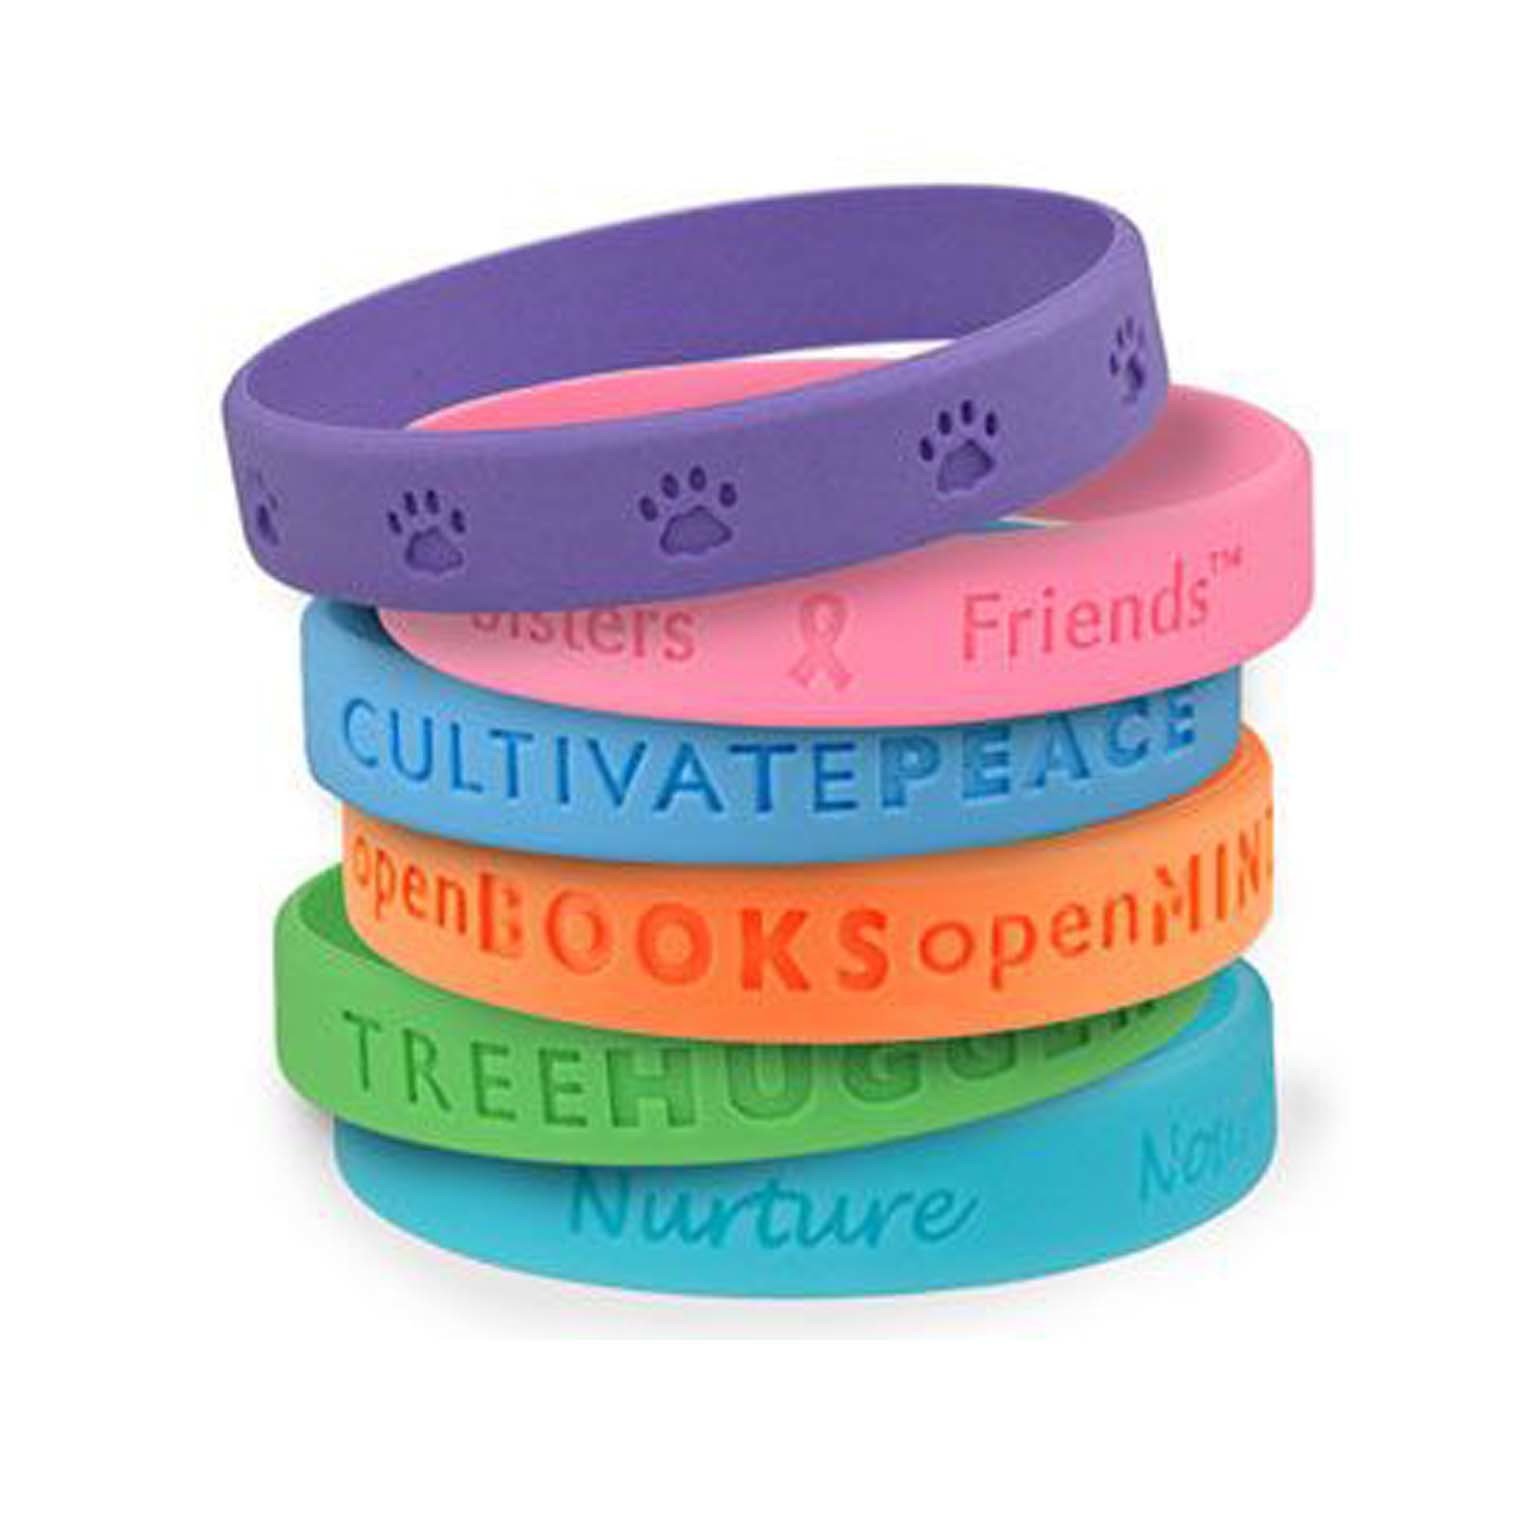 Cheap Debossed Silicone Wristbands with Your Logo